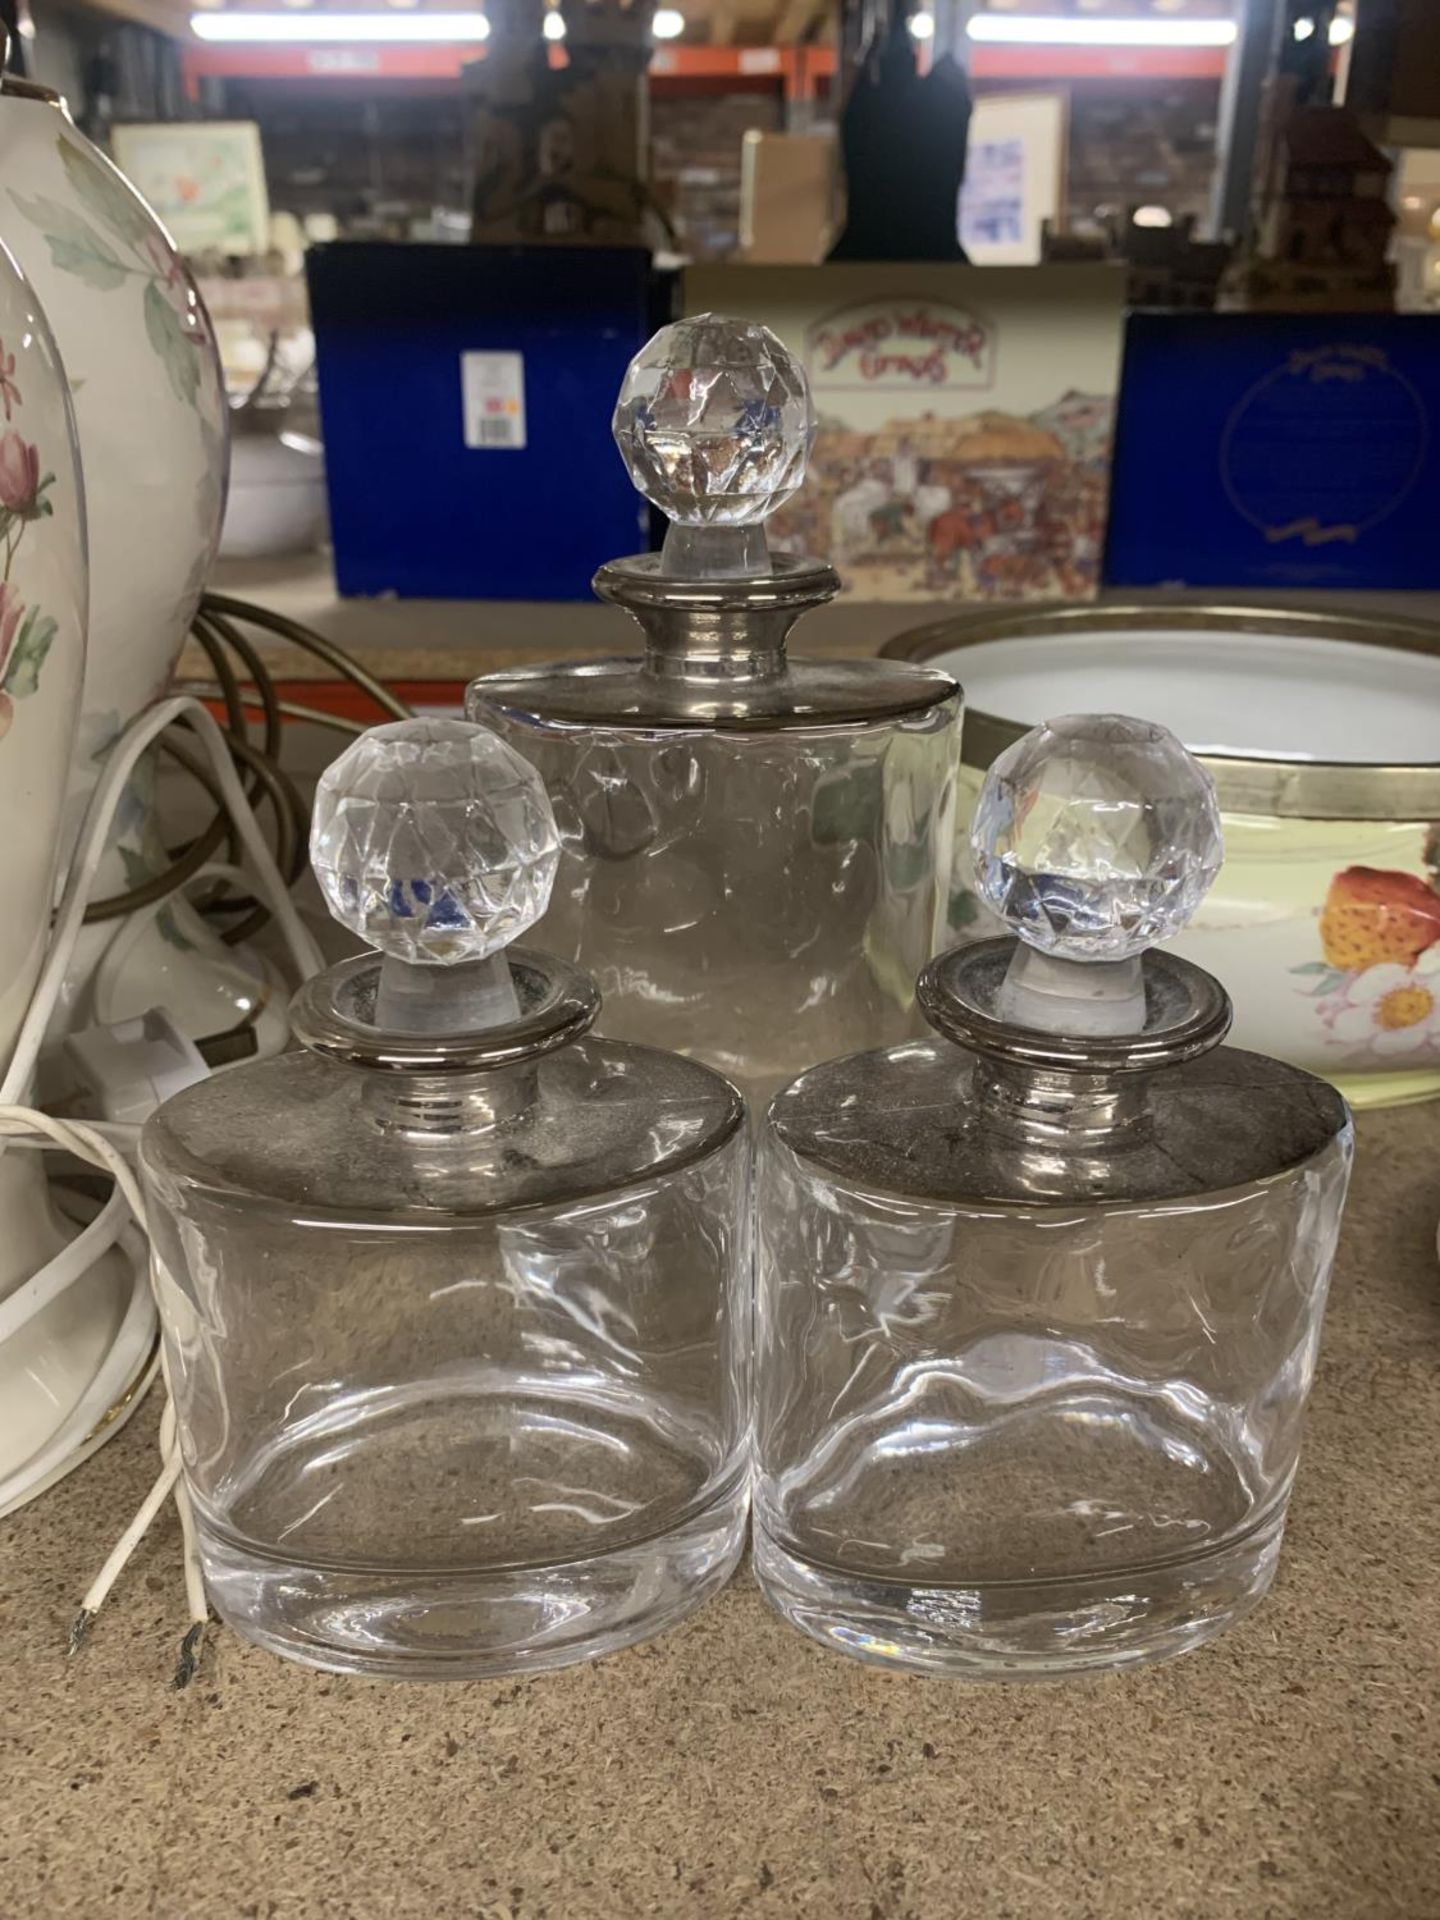 THREE GLASS DECANTERS, TRINKET BOXES, MIRRORED FLOWER HOLDER, ETC - Image 3 of 4